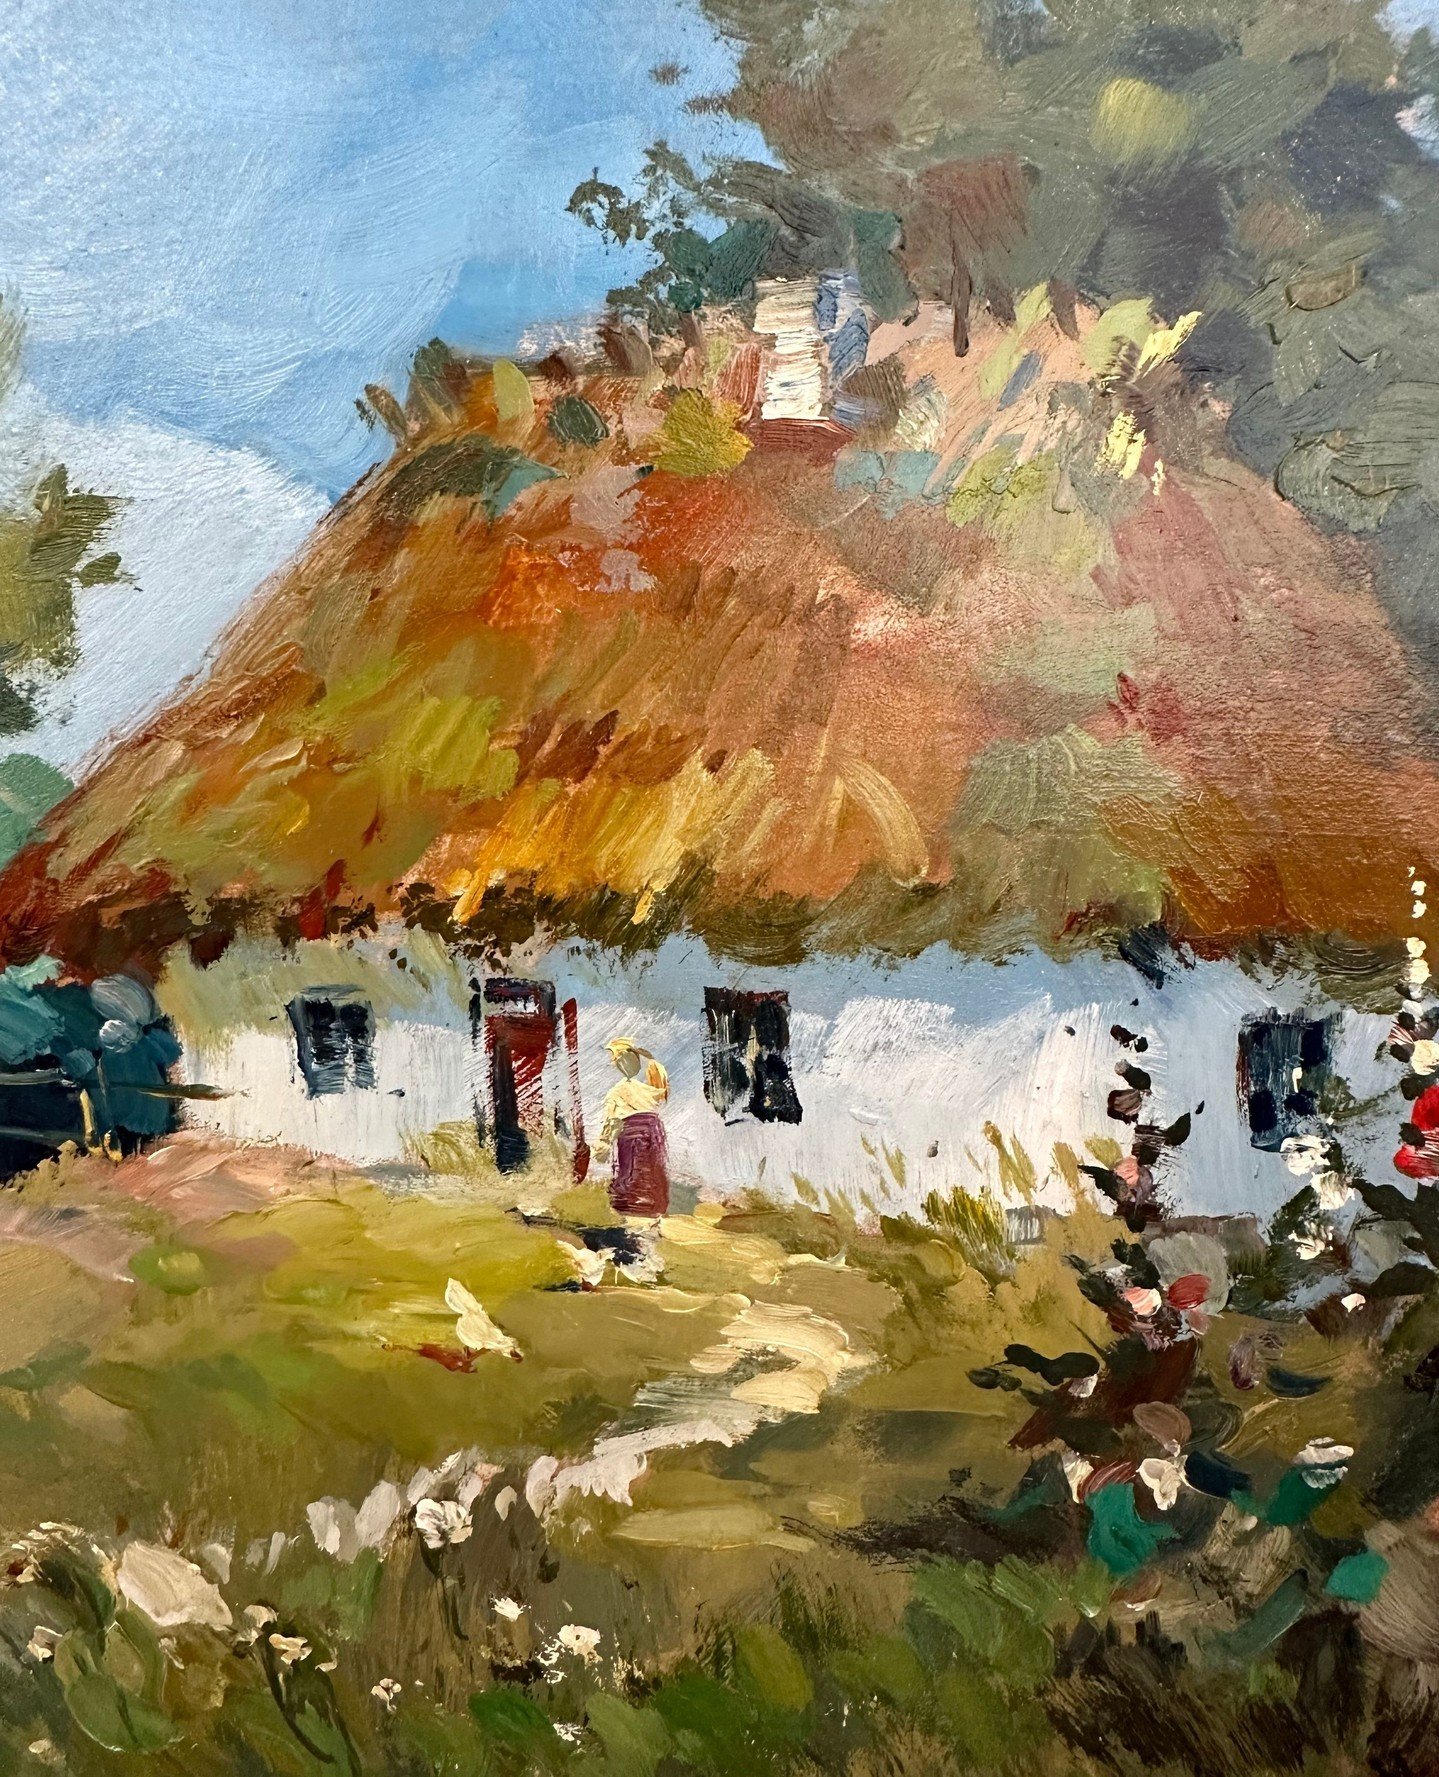 Simple Pleasures.⁠
⁠
We're dreaming of a summer cottage getaway with this original oil painting from Eastern Europe.⁠
⁠
Visit us on Balboa Island to shop, or message us with any questions!⁠
⁠
#coterieandcie